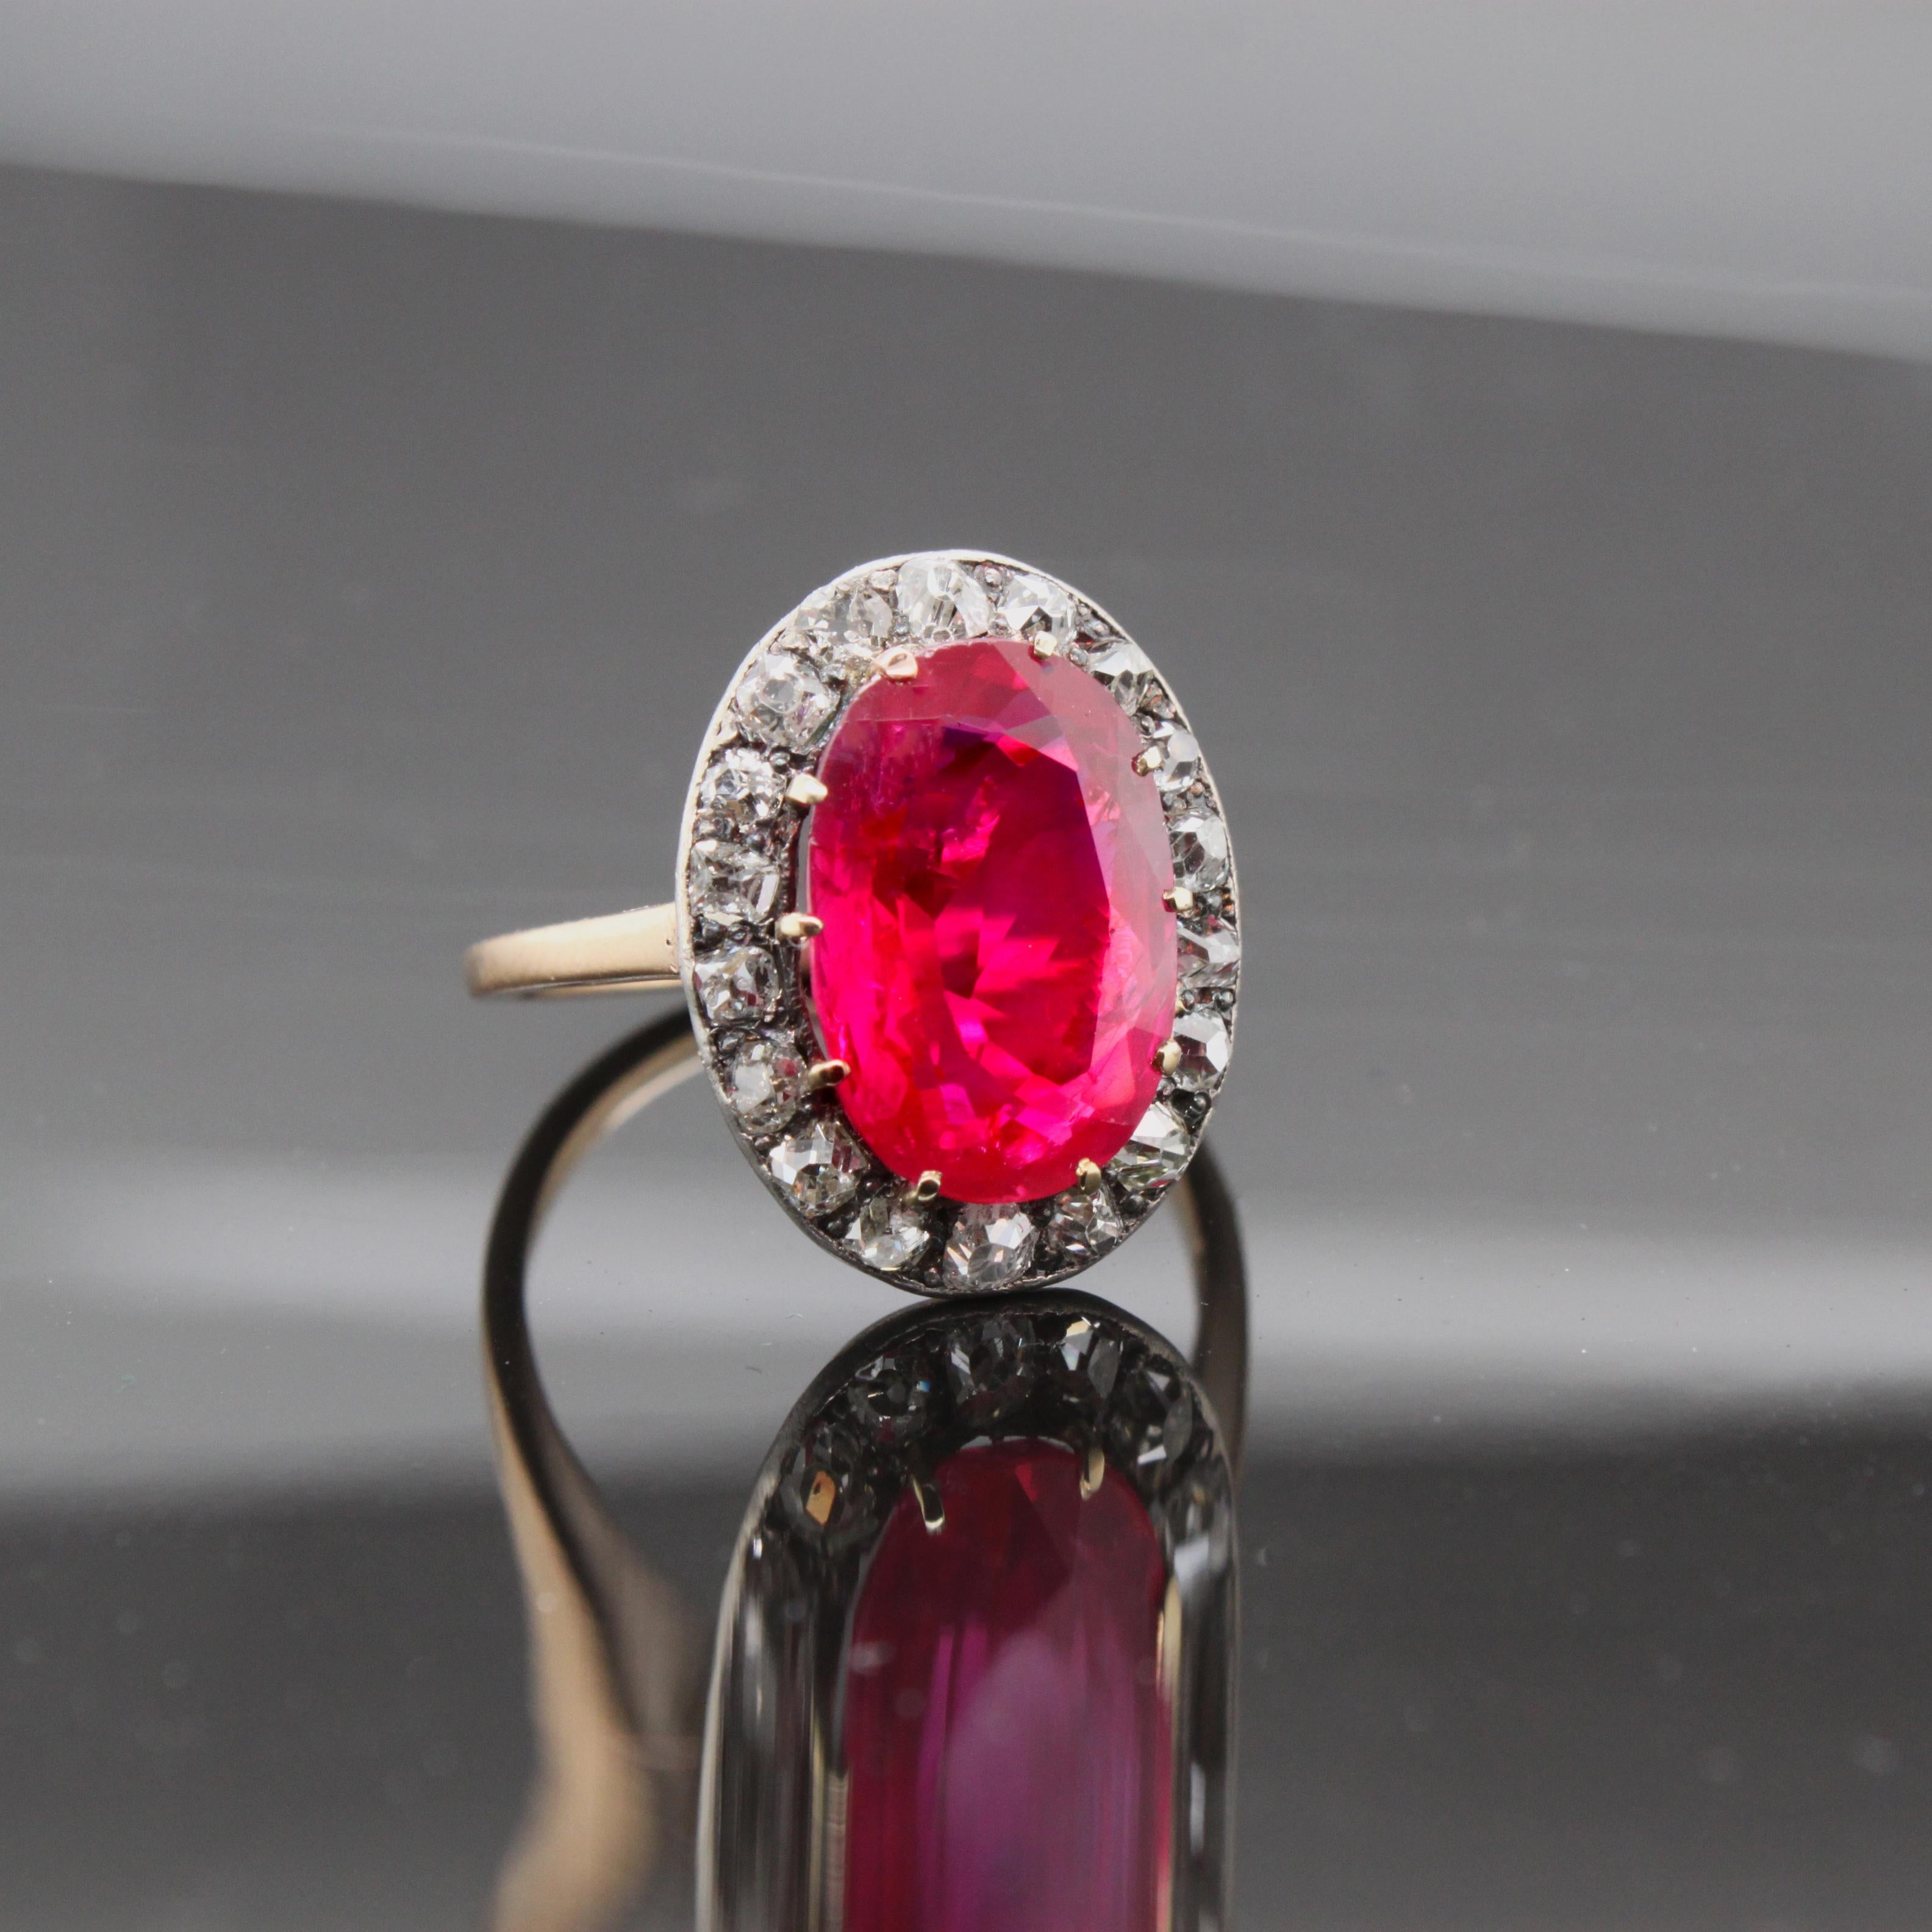 Women's or Men's Important Victorian Natural Burmese Ruby '6 Carat' and Diamond Ring, circa 1890s